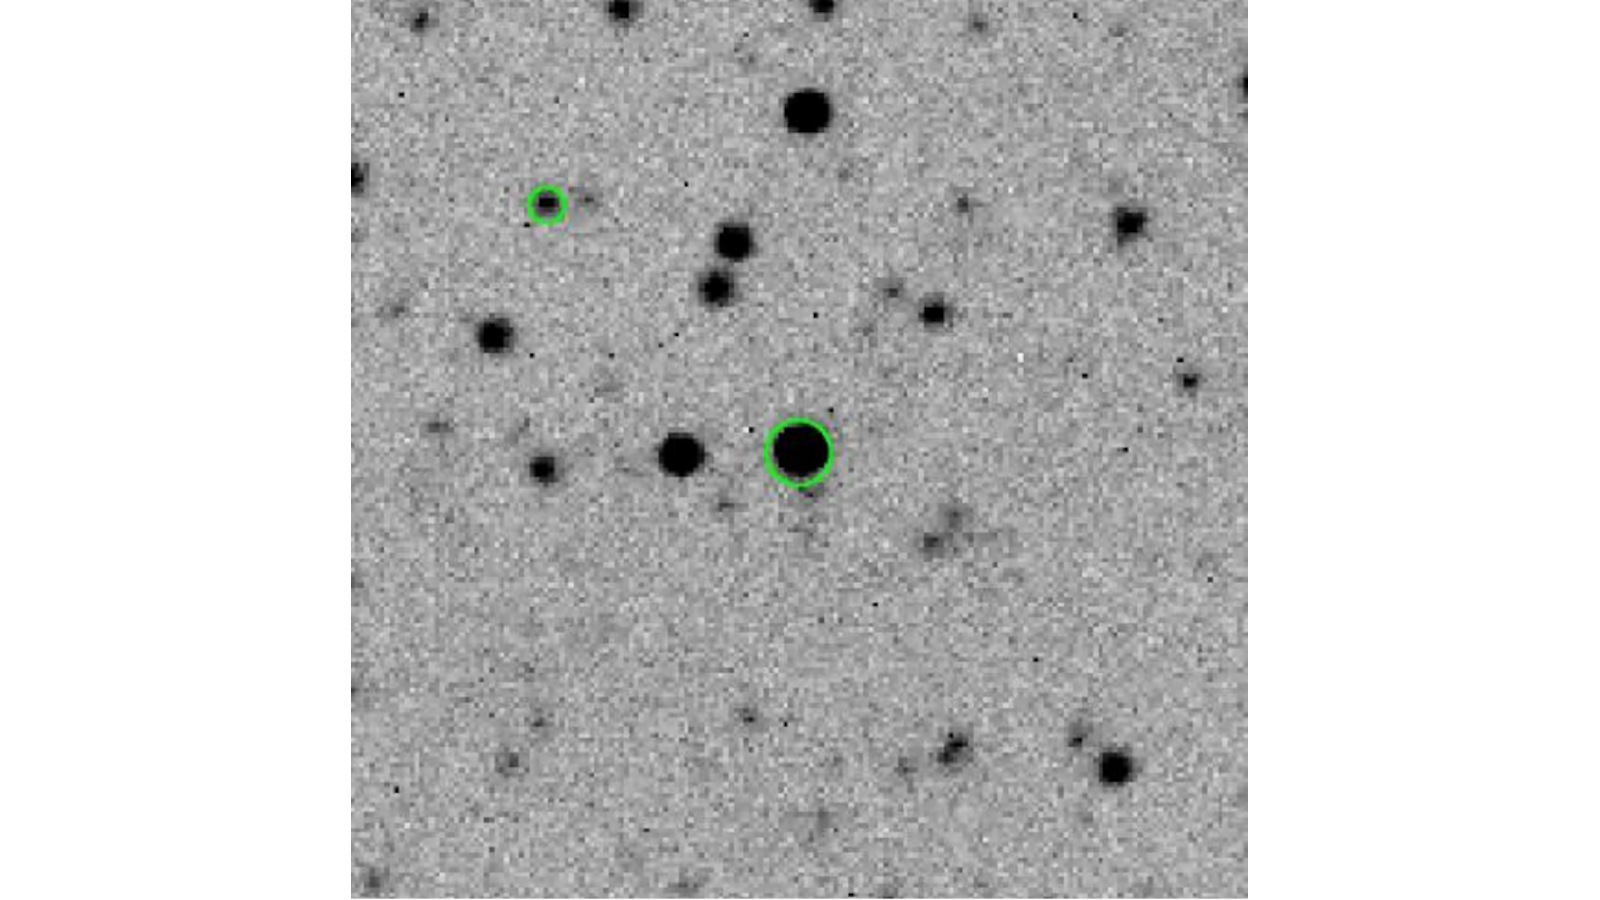 1-degree subfield from KELT, bright star circled is v=6.96mag, fainter star circled is V=10.96mag, faintest stars about 12mag